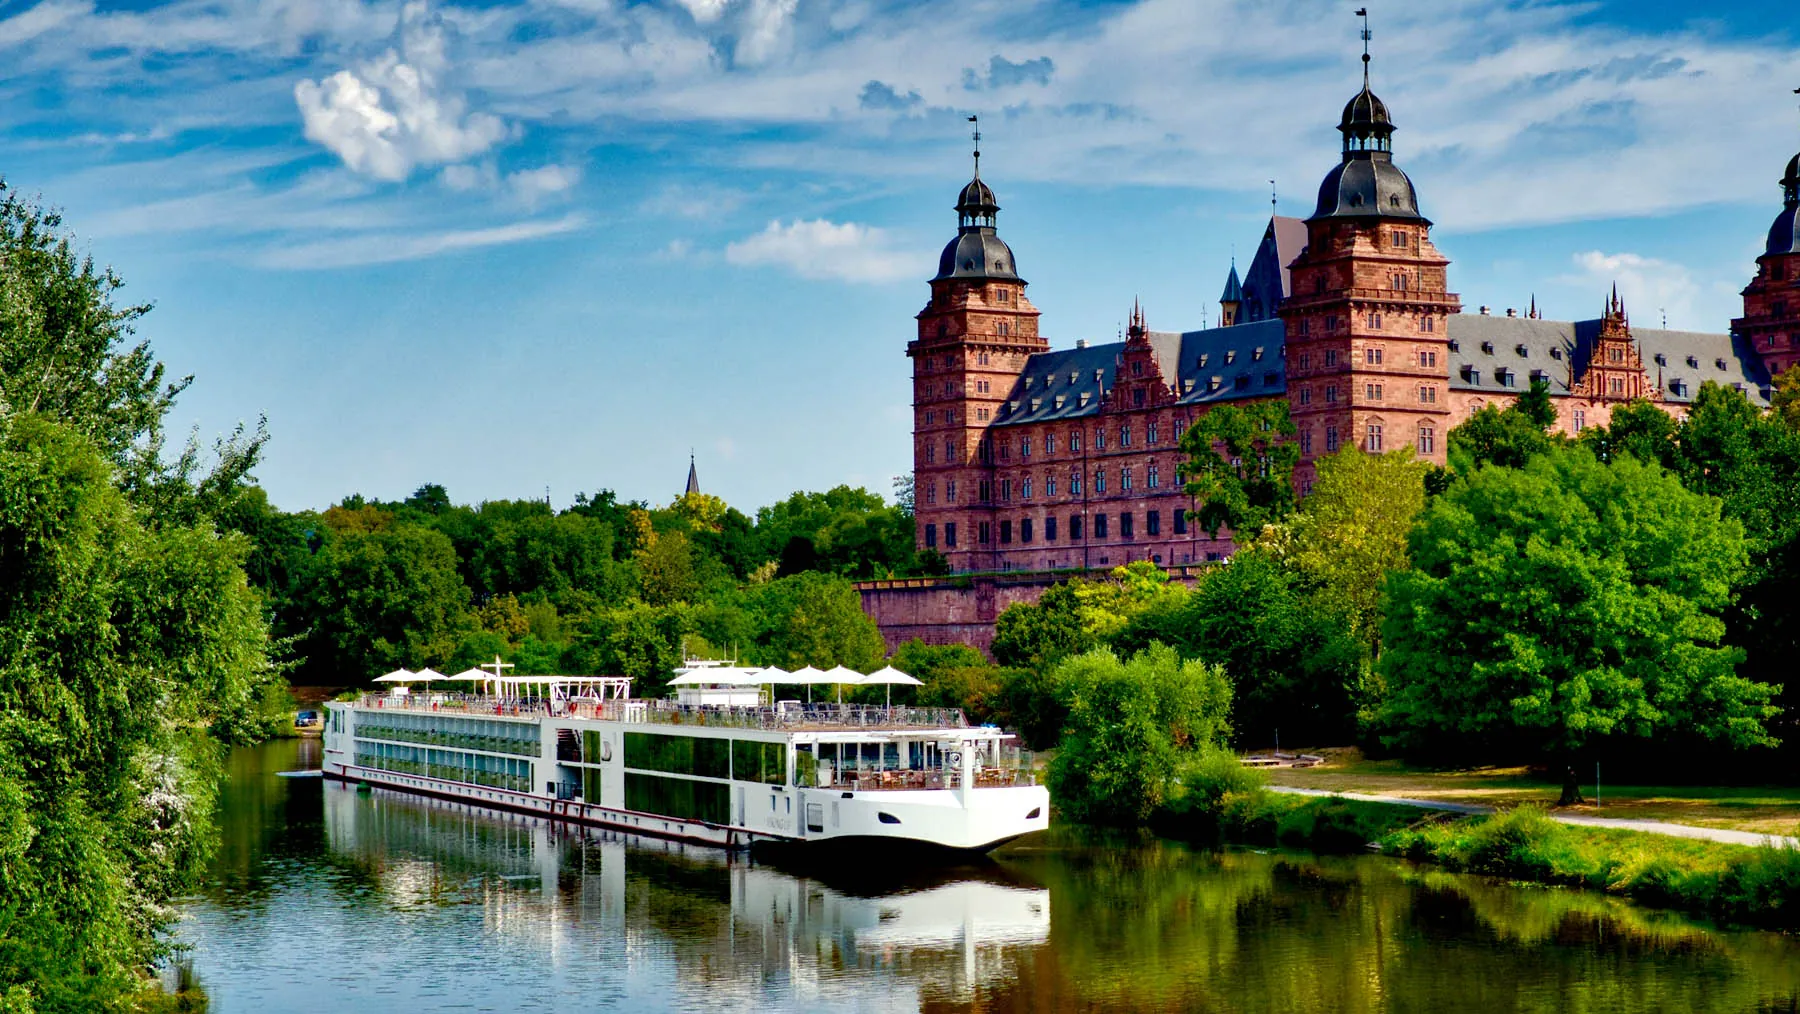 Viking offers one of the best river cruise deals in Europe